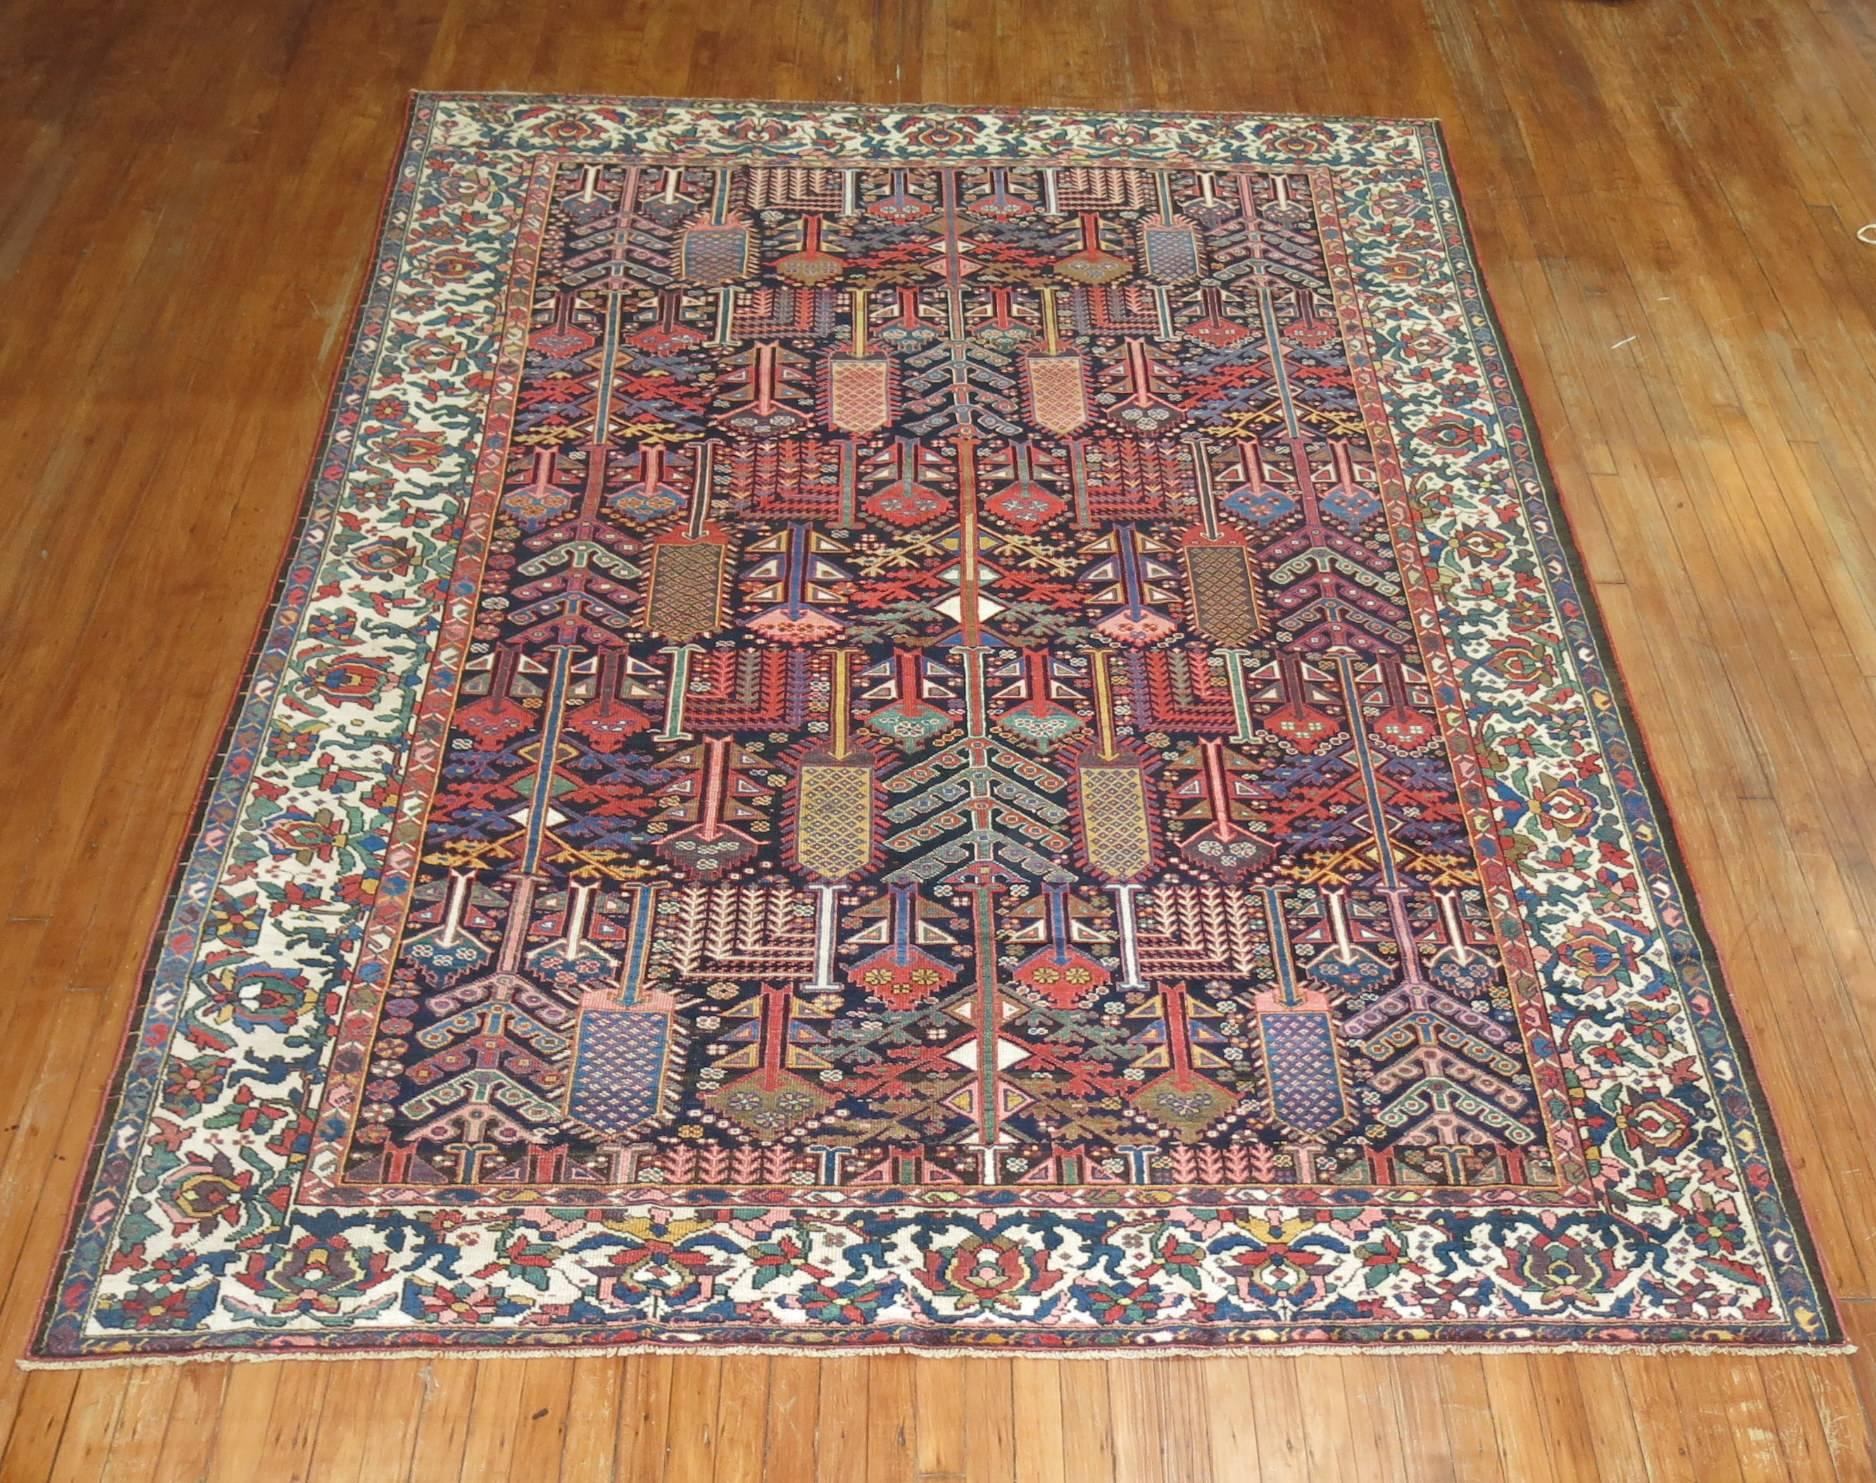 Lovely Persian Bakhtiari carpet depicting an all-over will tree design on a navy blue ground.